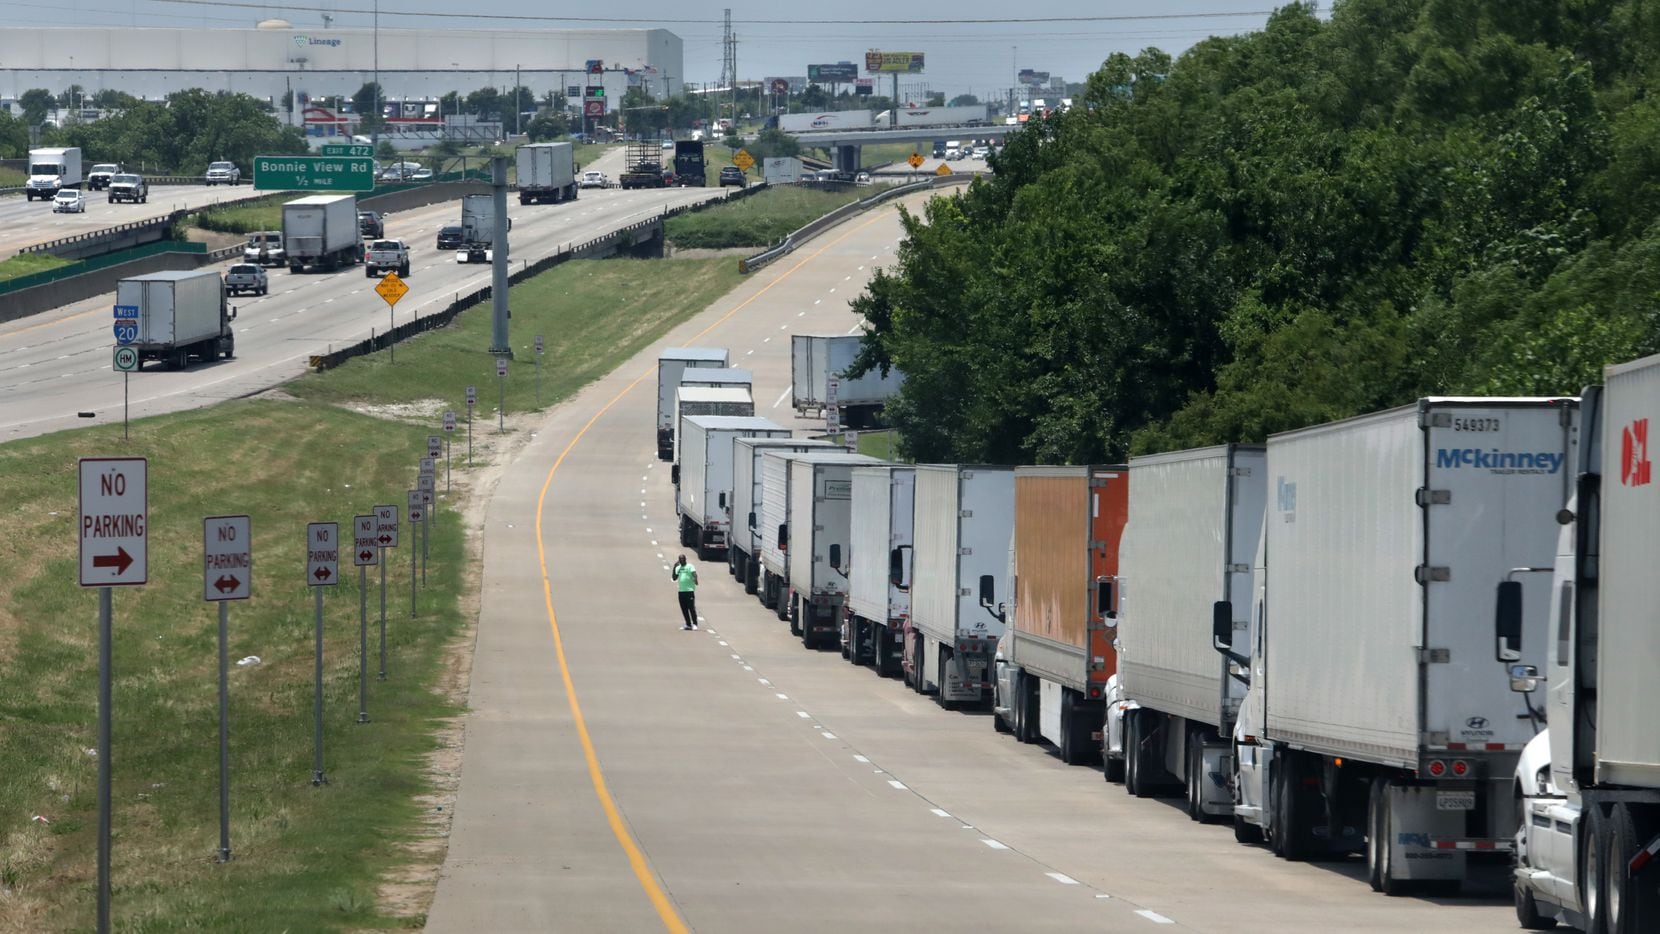 A long line of delivery trucks waits to enter the Amazon Fulfillment Center in South Dallas...